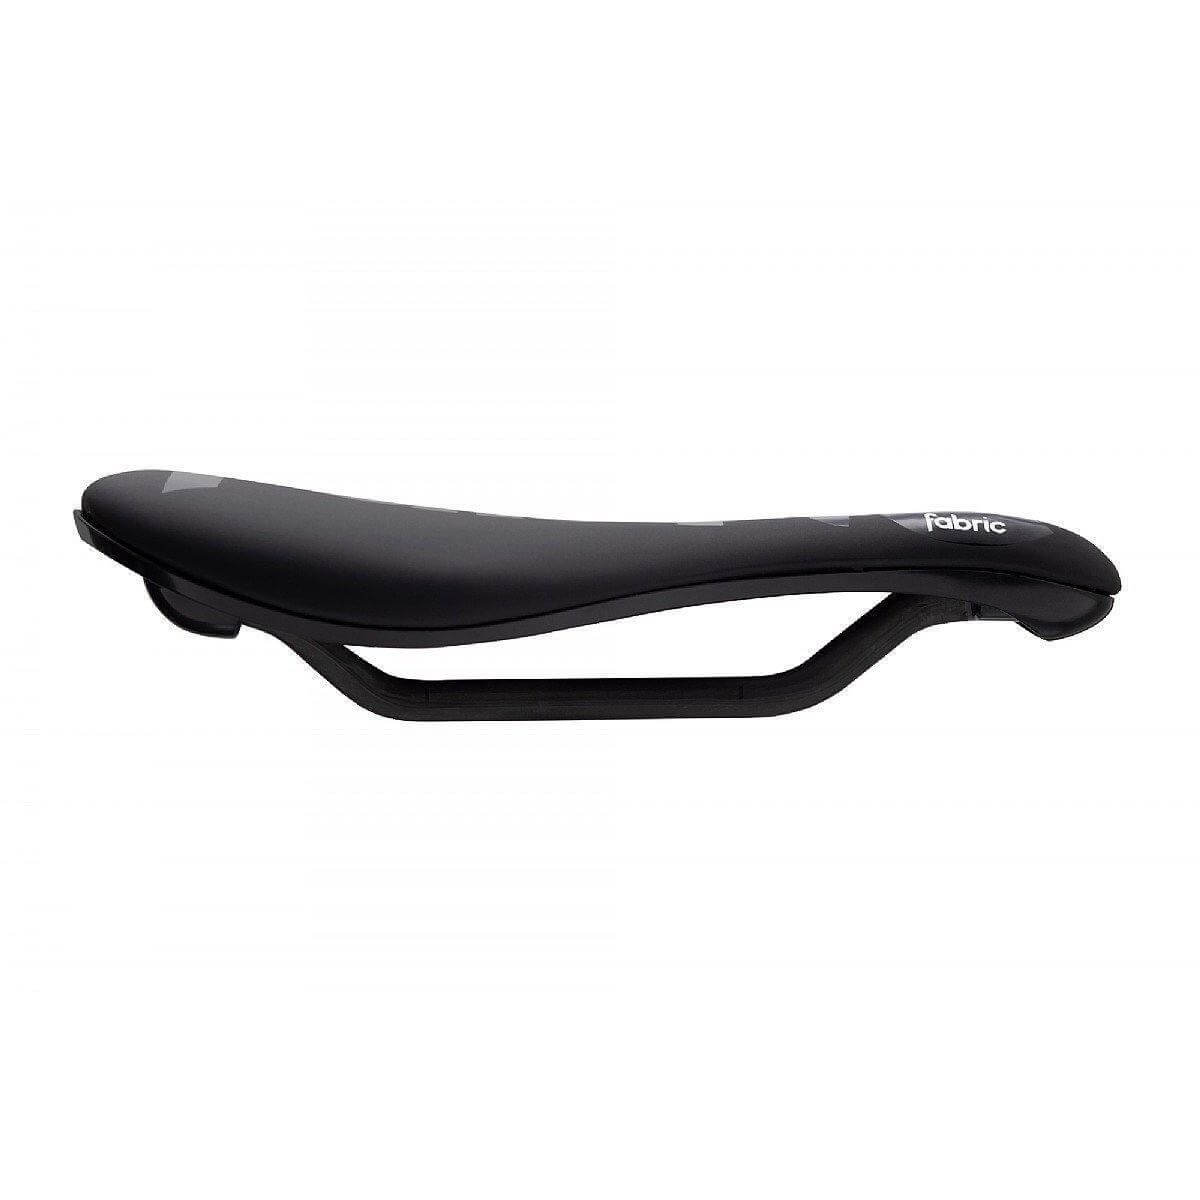 Fabric Line S Pro Flat Saddle | Strictly Bicycles